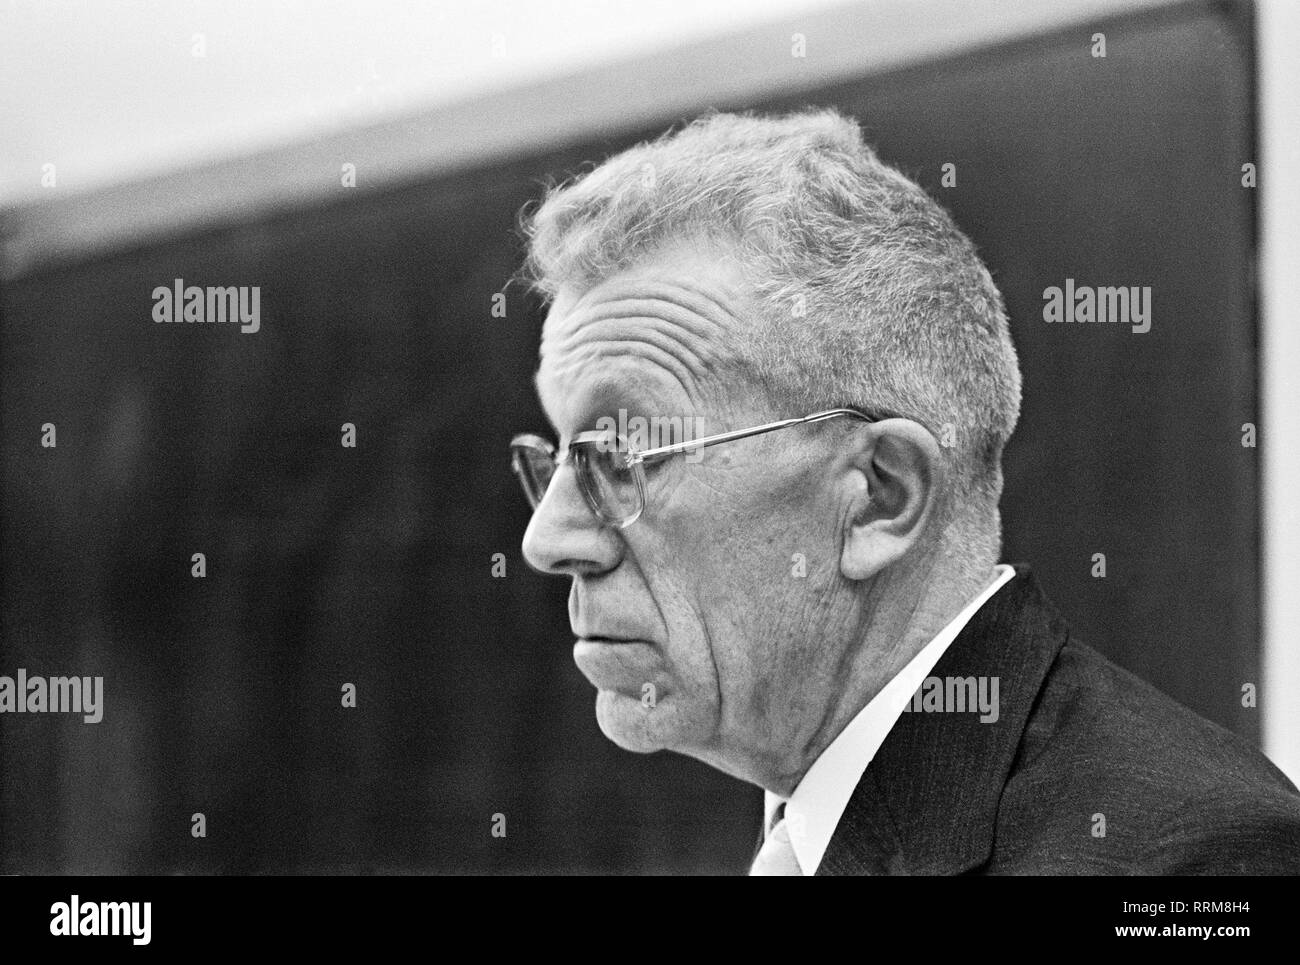 Asperger, Hans, 18.2.1906 - 21.10.1980, Austrian pediatrician and remedail teacher, portrait, at a meeting, circa 1970, Additional-Rights-Clearance-Info-Not-Available Stock Photo